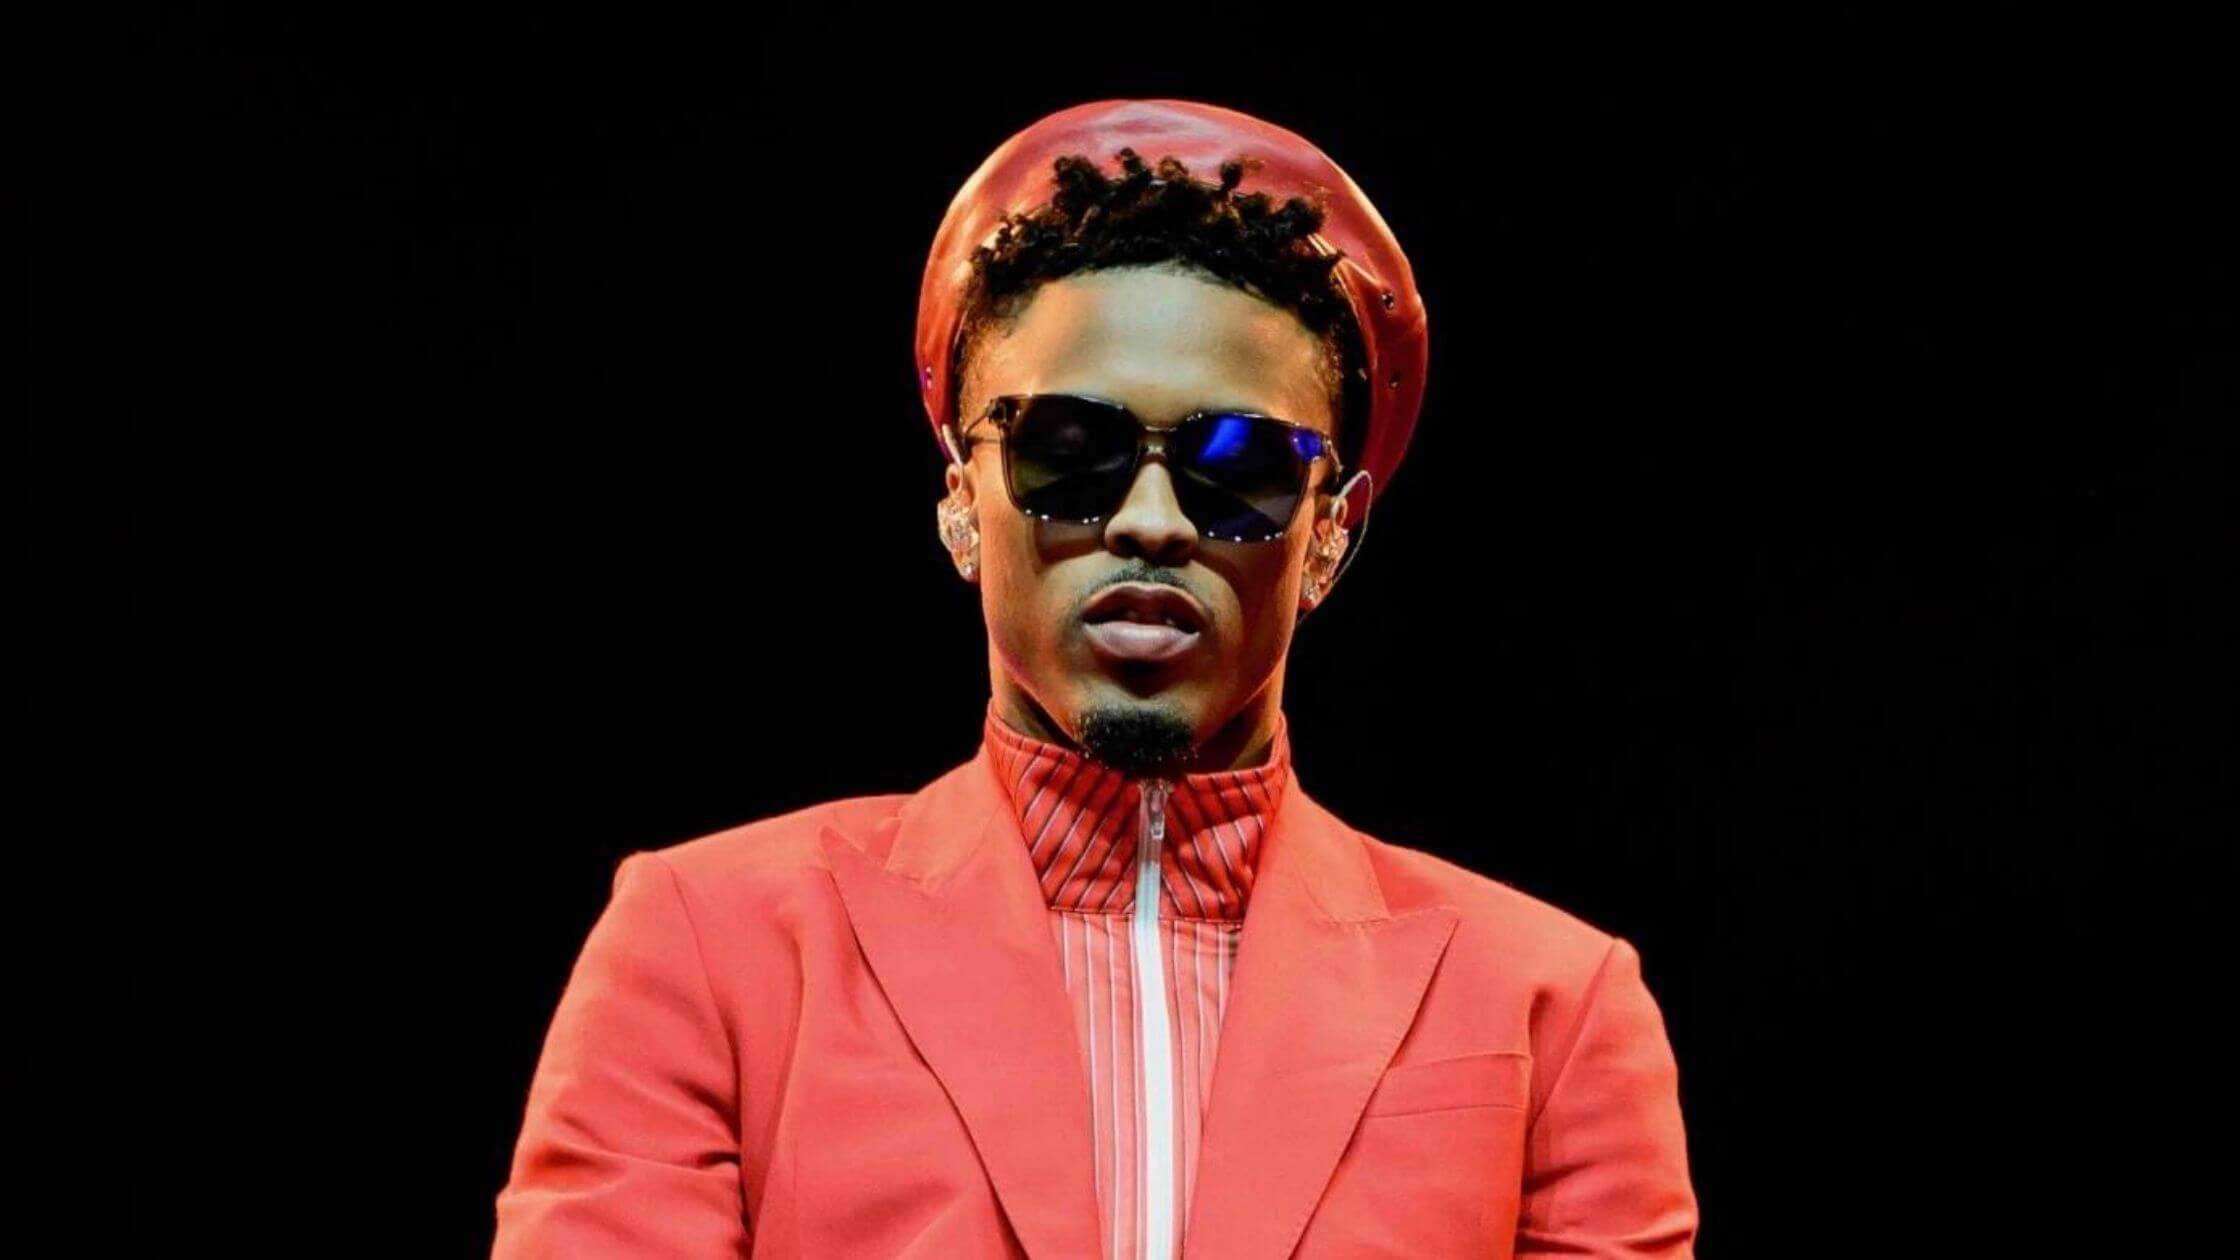 August Alsina's Net Worth, Biography, Age, Relationship, Wife, Height